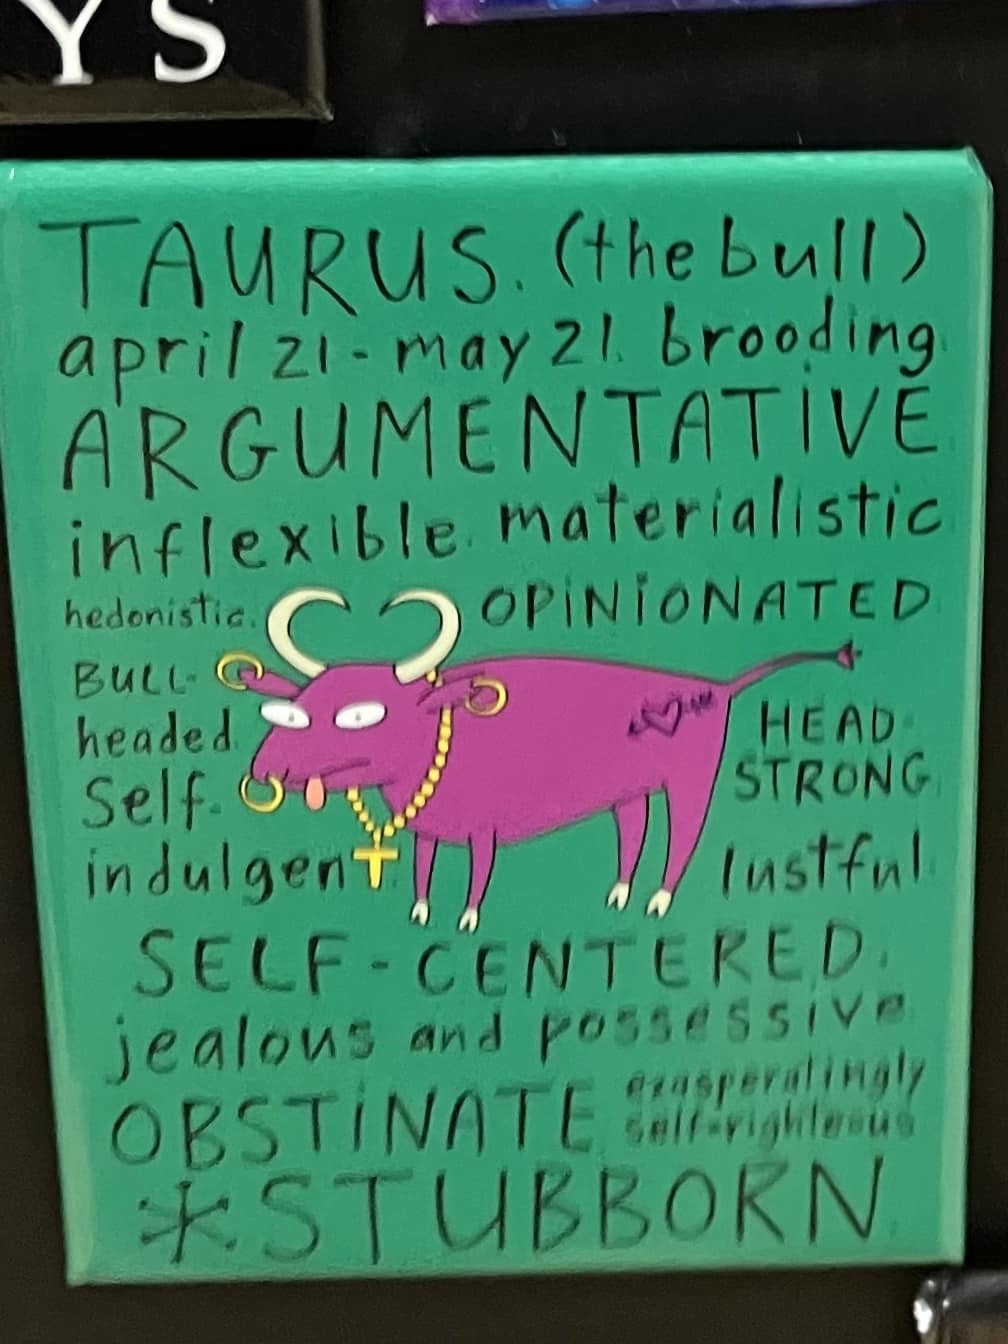 a magnet with the text that describes "Taurus (the bull)" “self indulgent” “materialistic”, “self centered” , “self righteous”, “jealous and possessive” This is now more of my mother.I sometimes wonder if this happens when a Taurus ages.